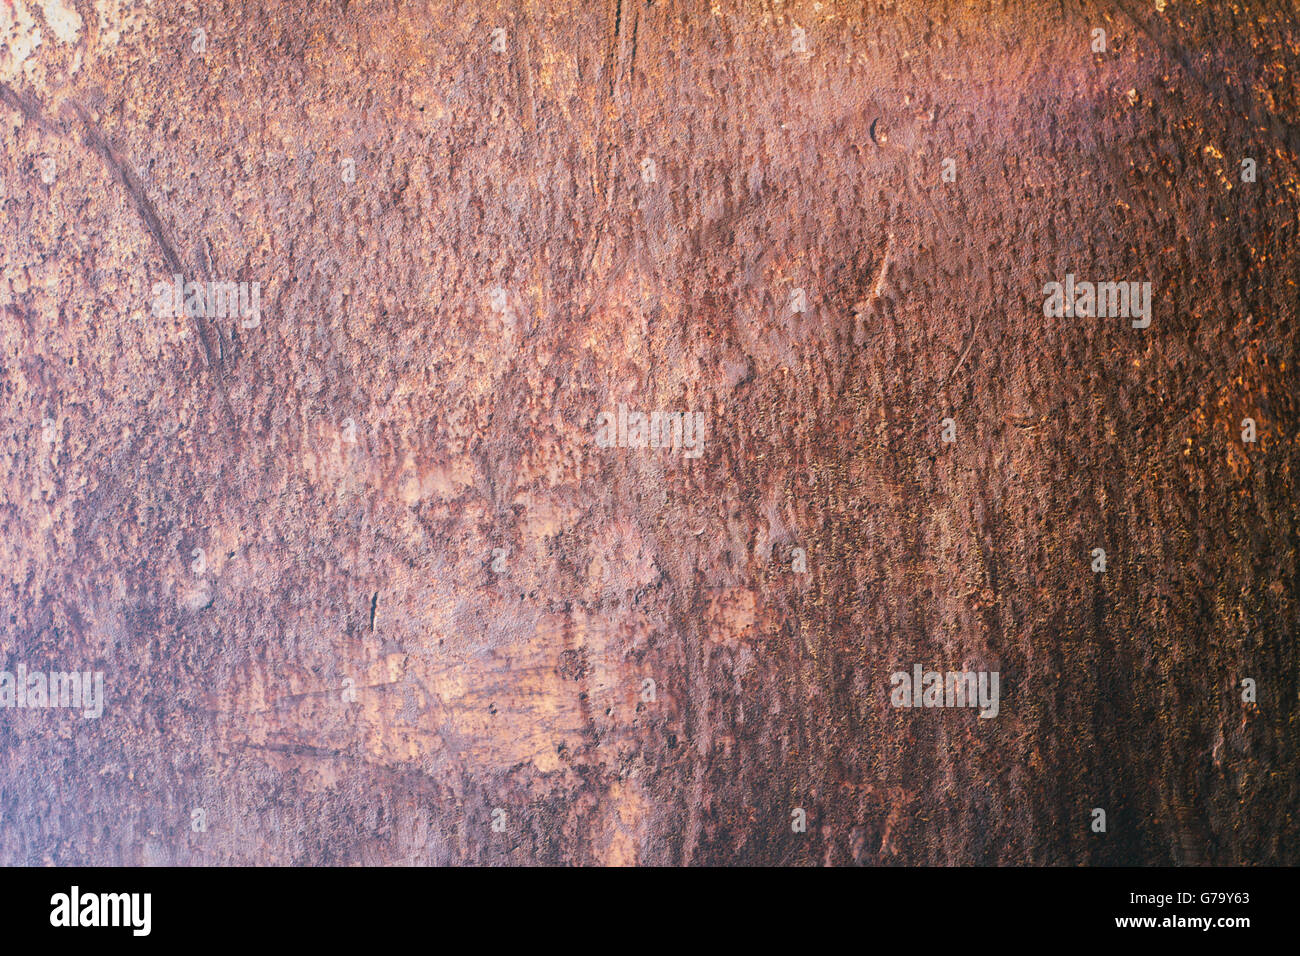 Photograph of a metal rusty texture Stock Photo